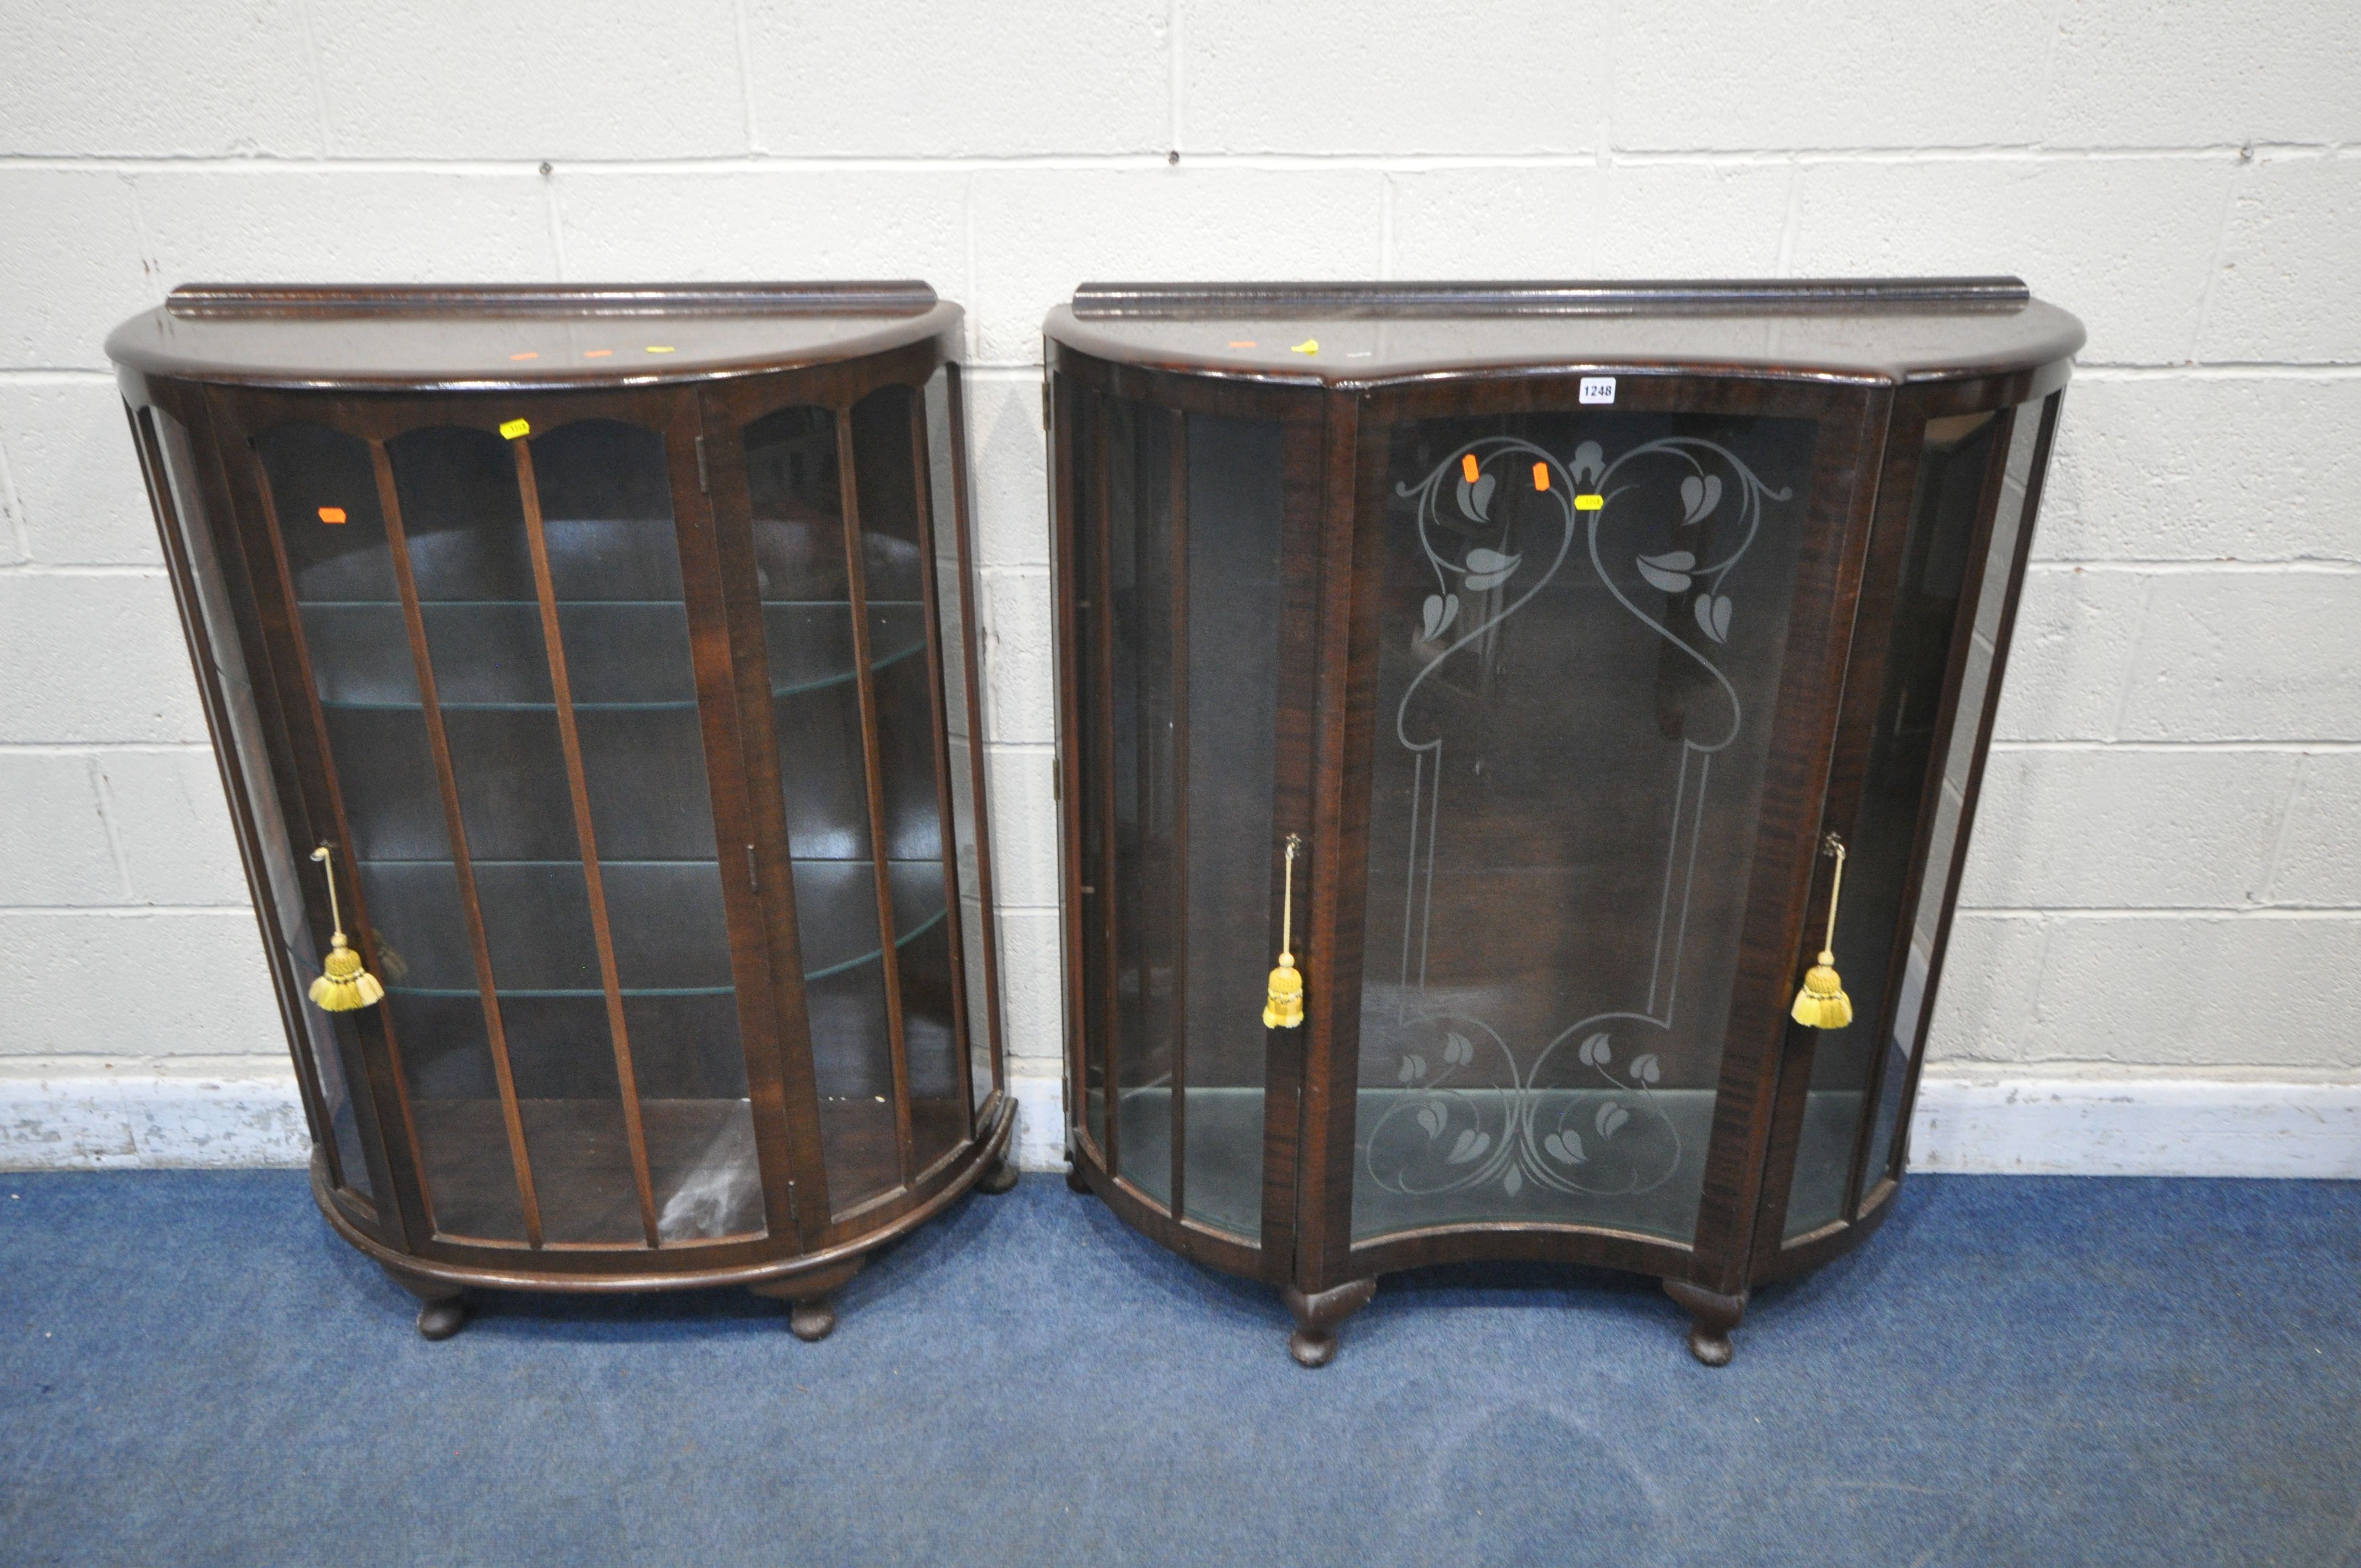 TWO 20TH CENTURY MAHOGANY DISPLAY CABINETS, each with a single door and two glass shelves, on